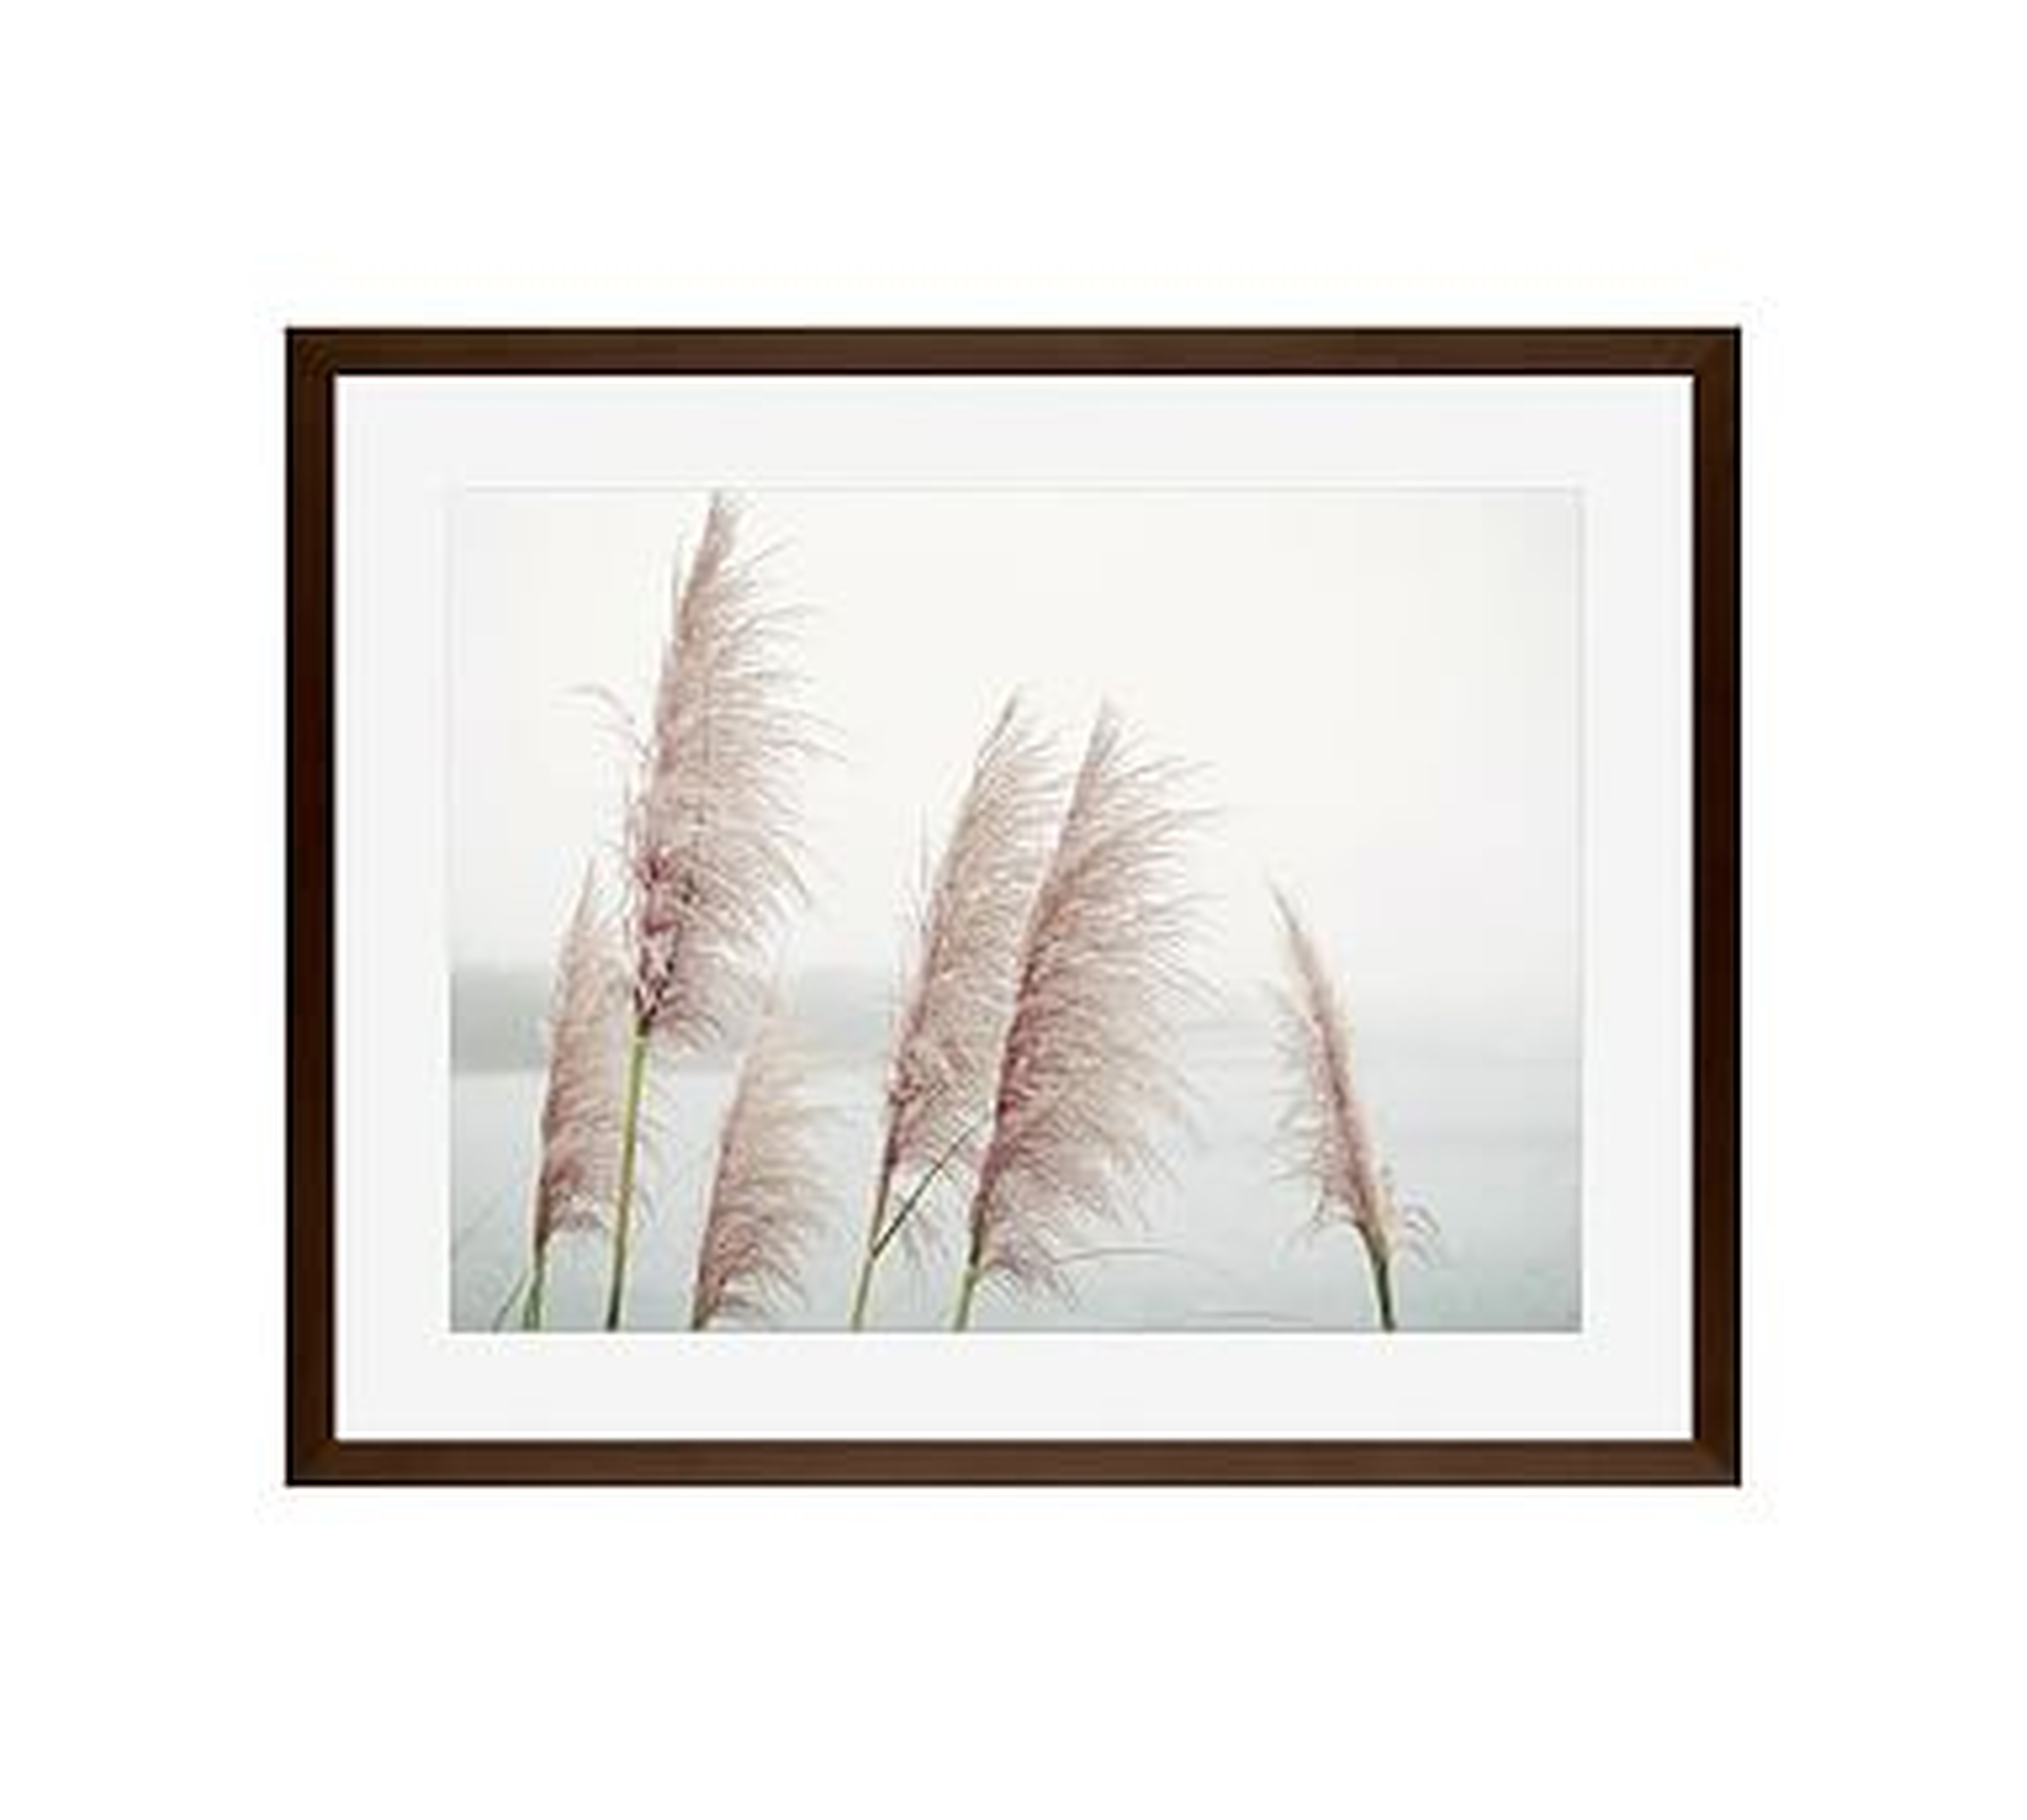 Wild Pampas by Lupen Grainne, 20 x 16", Wood Gallery, Frame, Espresso, Mat - Pottery Barn